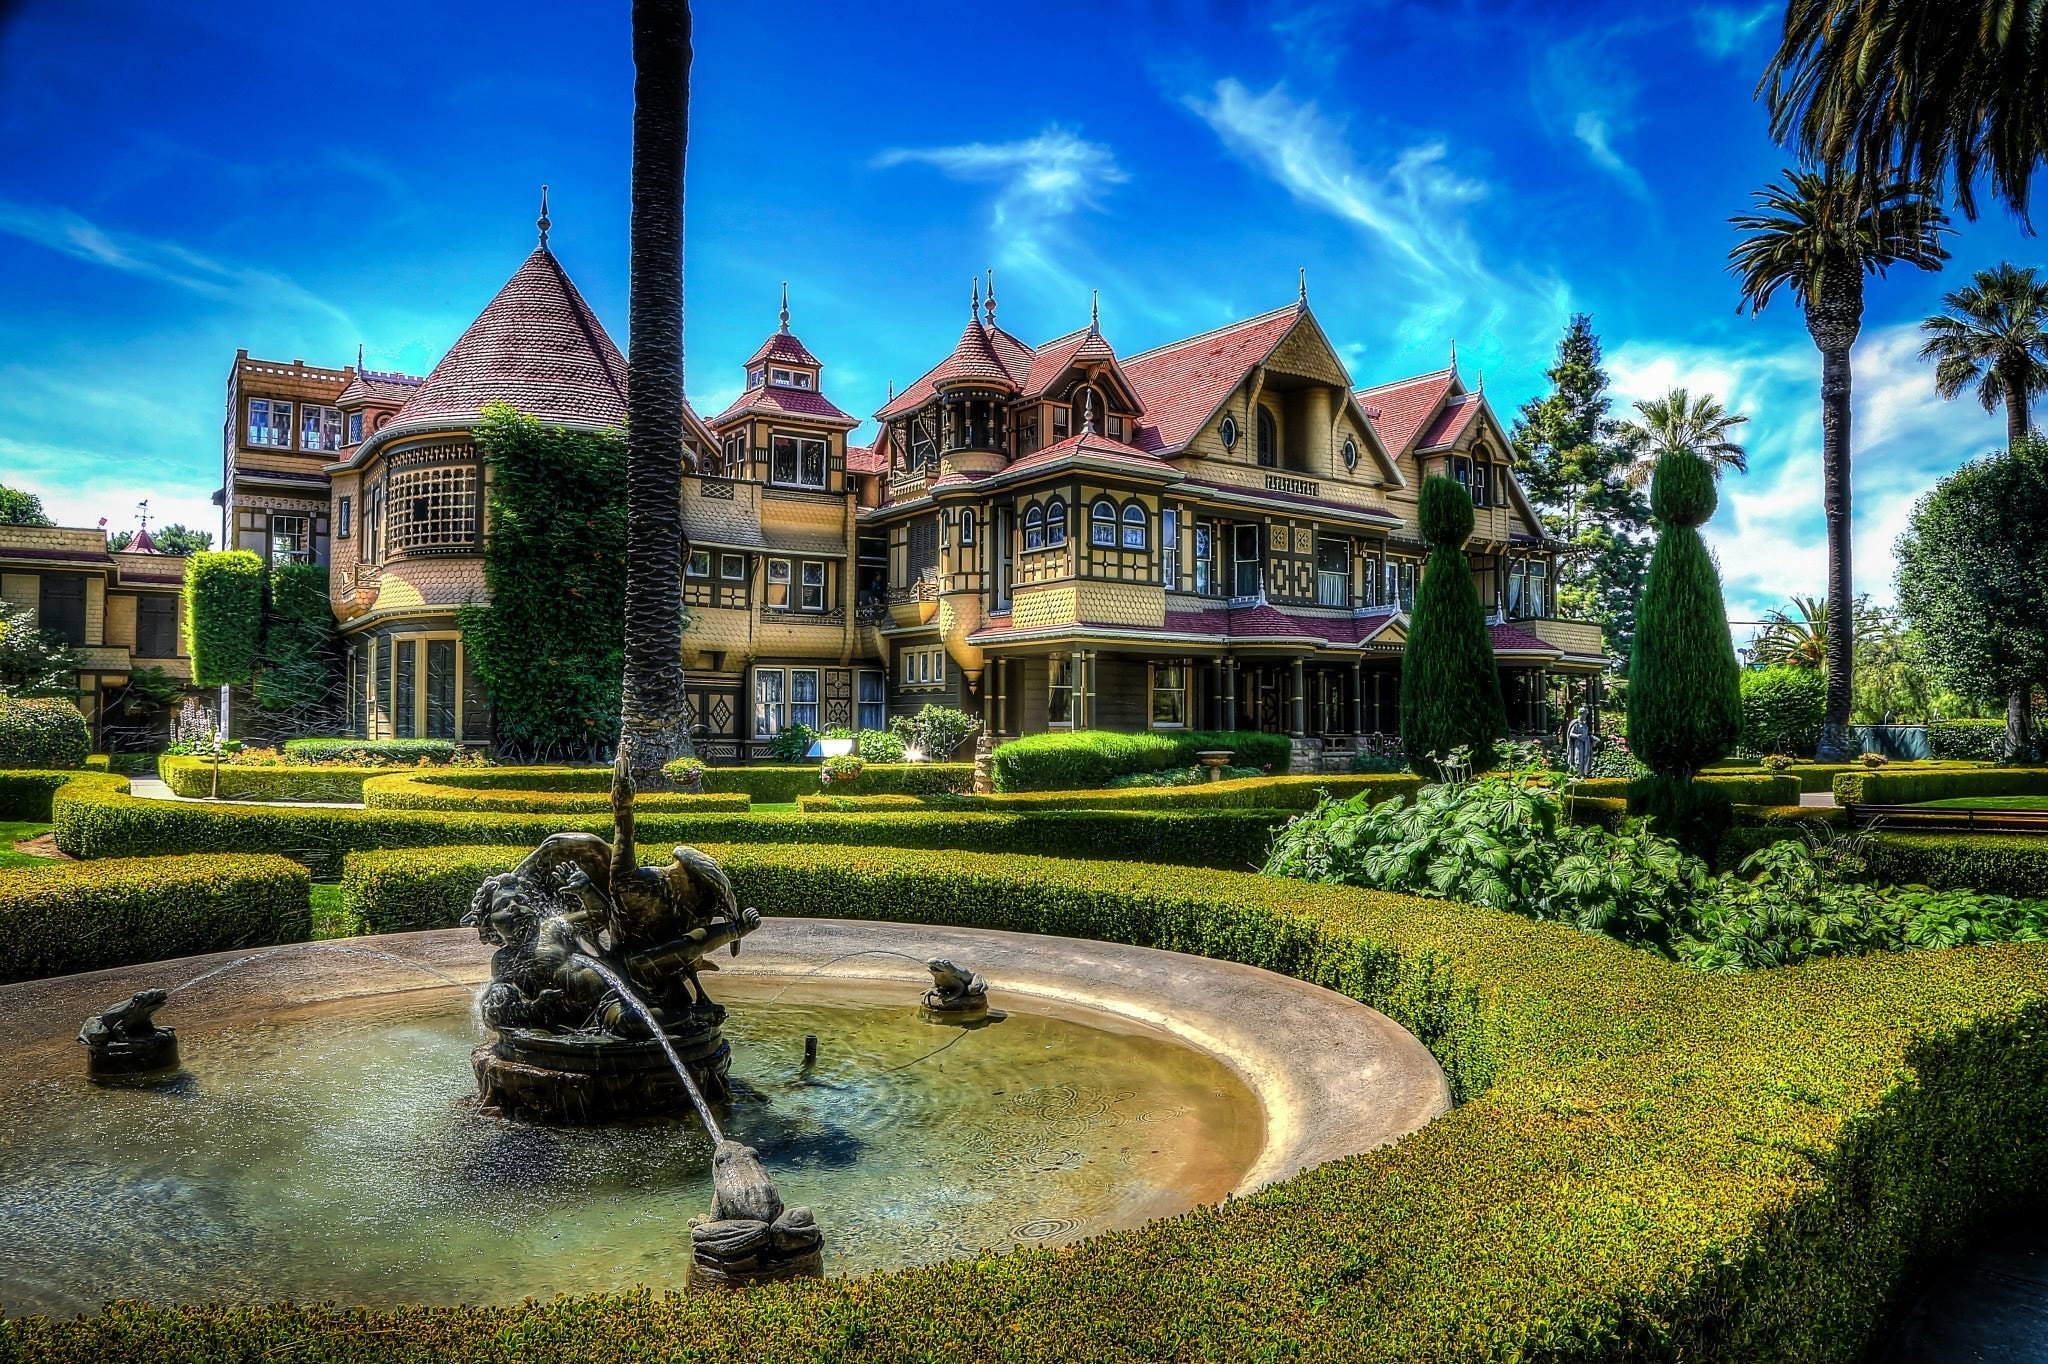 These are the top haunted destinations in the US, according to readers